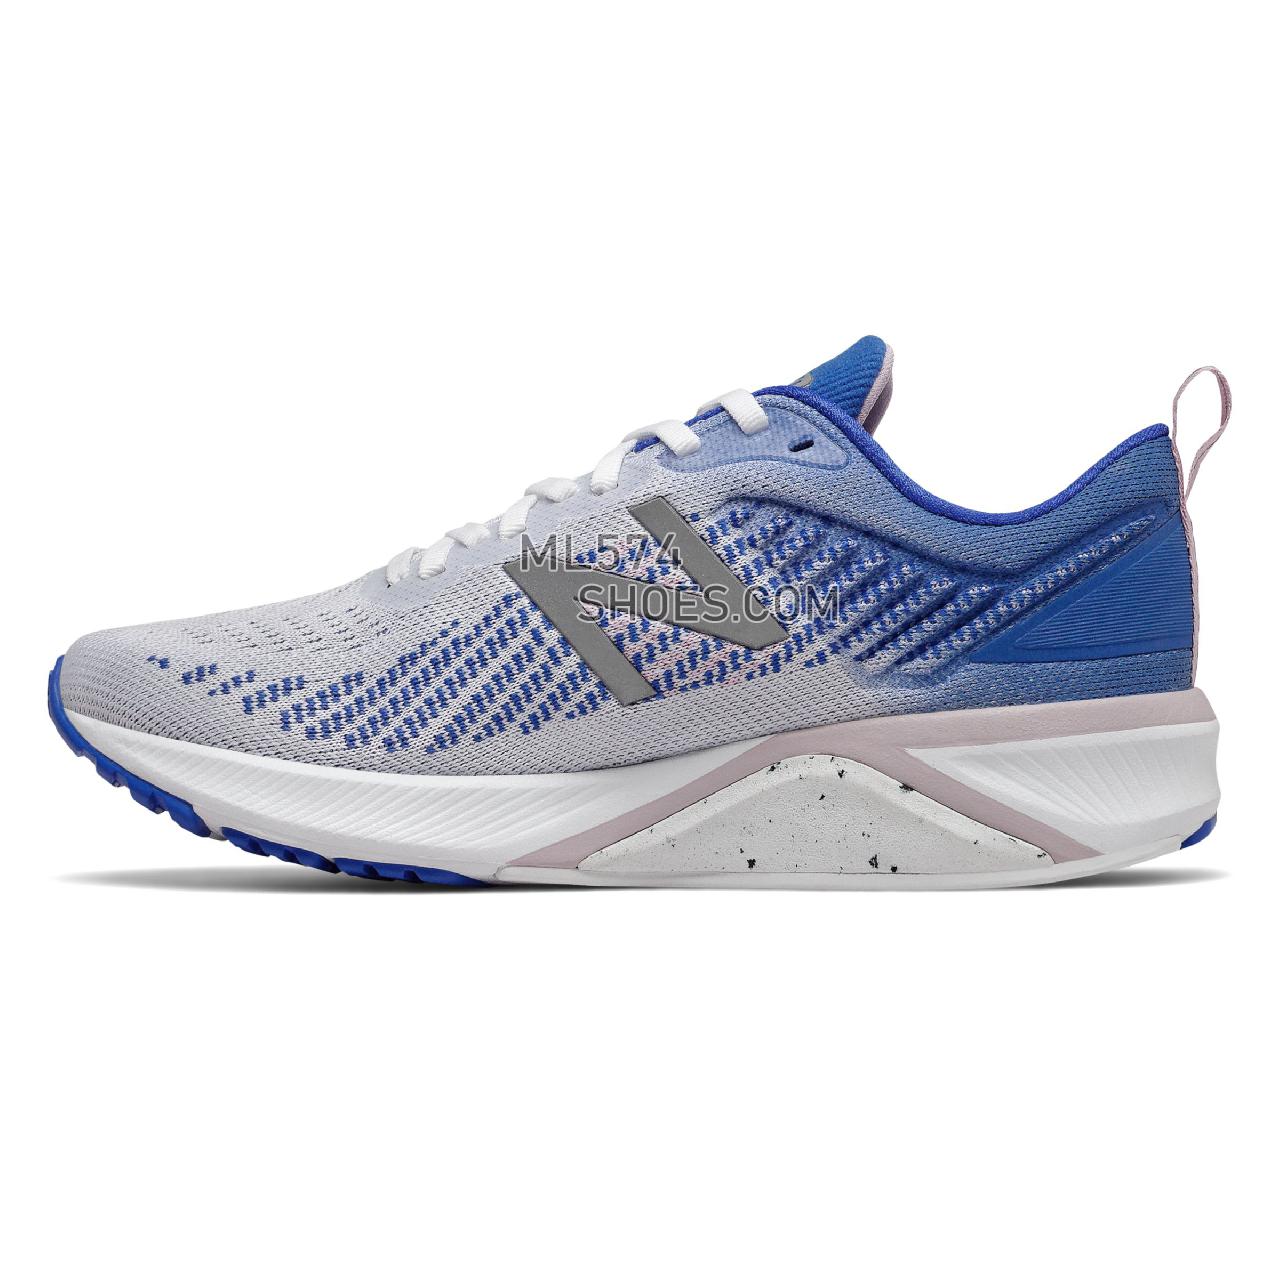 New Balance 870v5 - Women's Stability Running - White with Vivid Cobalt and Oxygen Pink - W870WB5